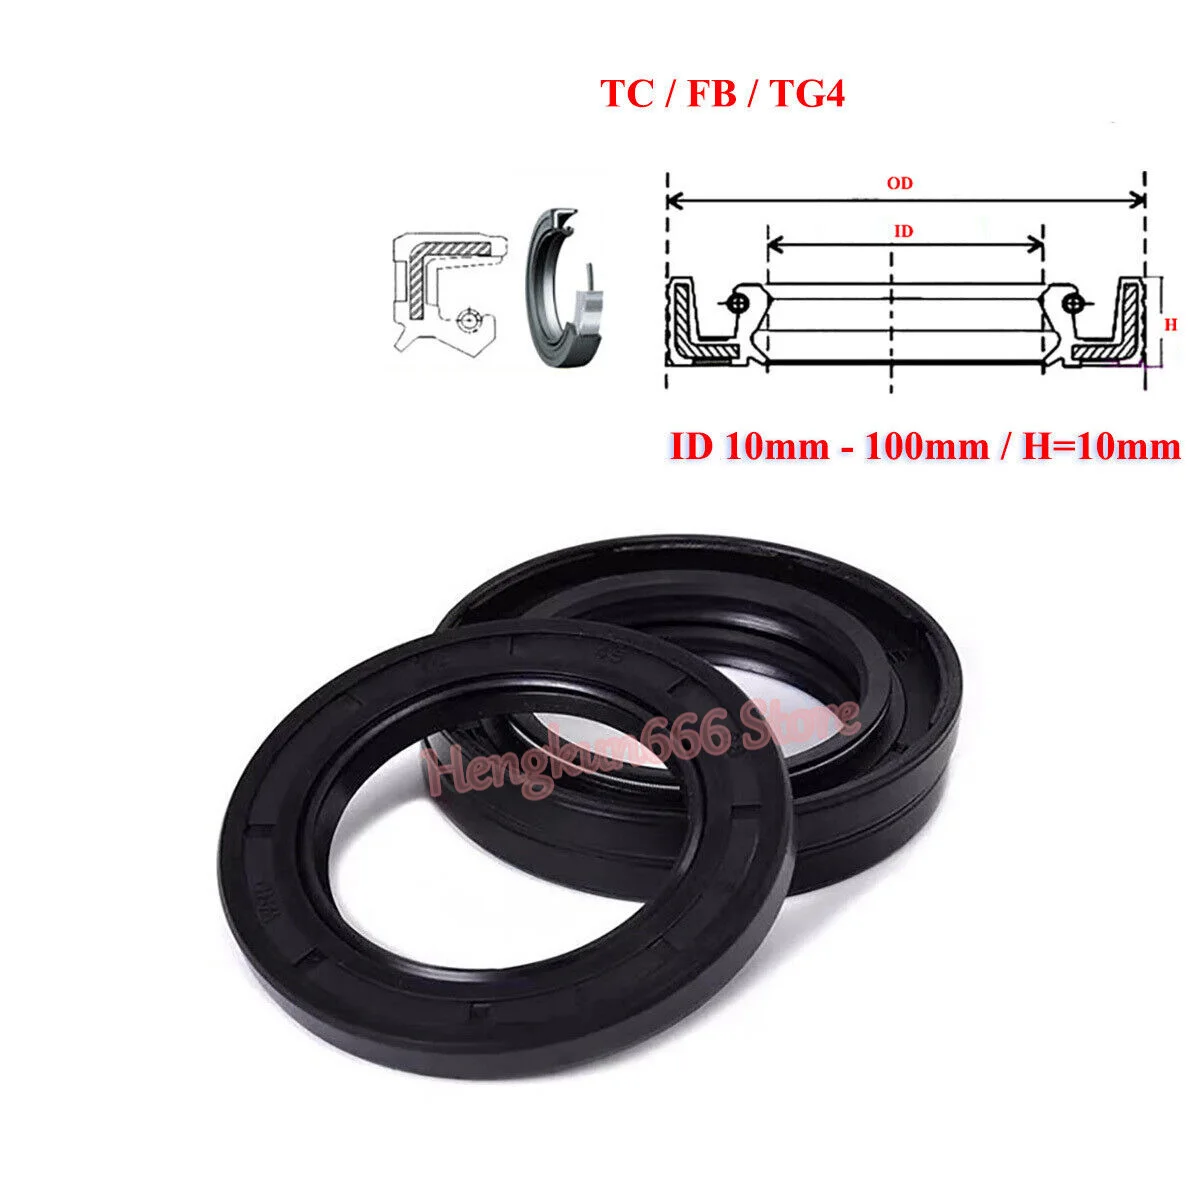 

2pcs TC/FB/TG4 NBR Skeleton Oil Sealing Rings ID 10-100mm / Thickness 10mm Nitrile Rubber Double Lip Seals for Rotation Shaft